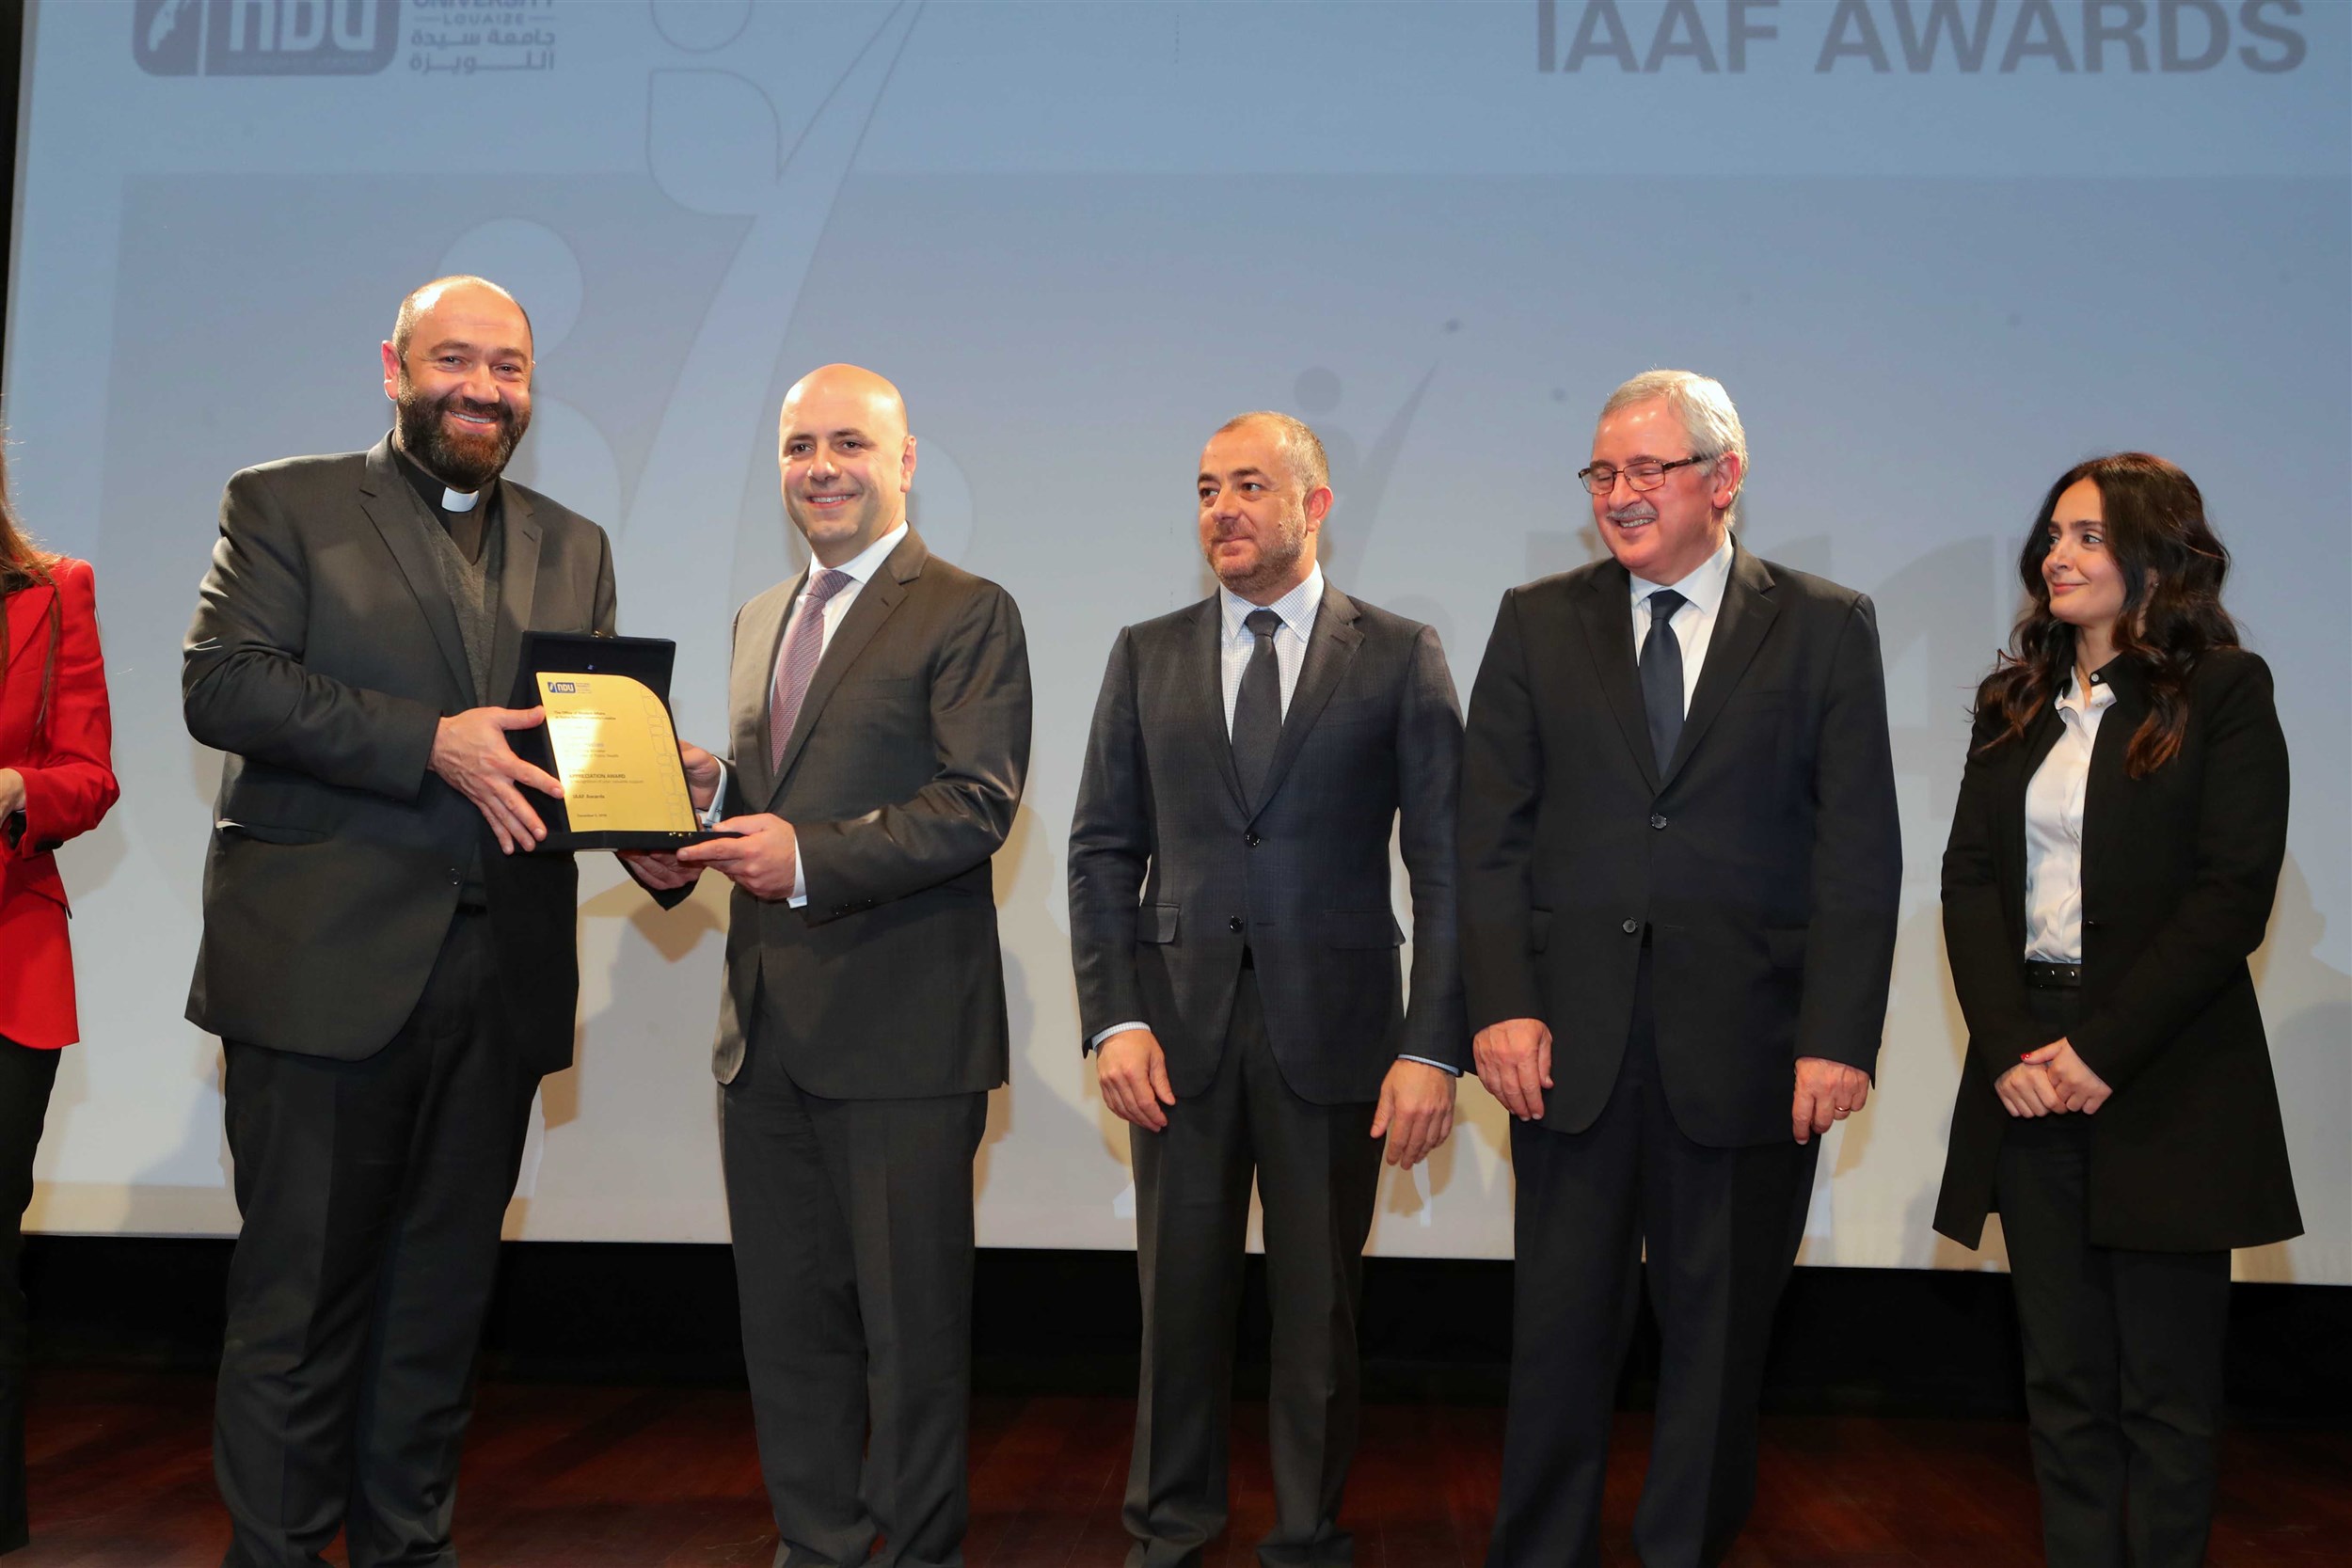 minister of public health his excellency ghassan hasbani receives a sheild of appreciation from the notre dame university- louaize for his accomplishments.